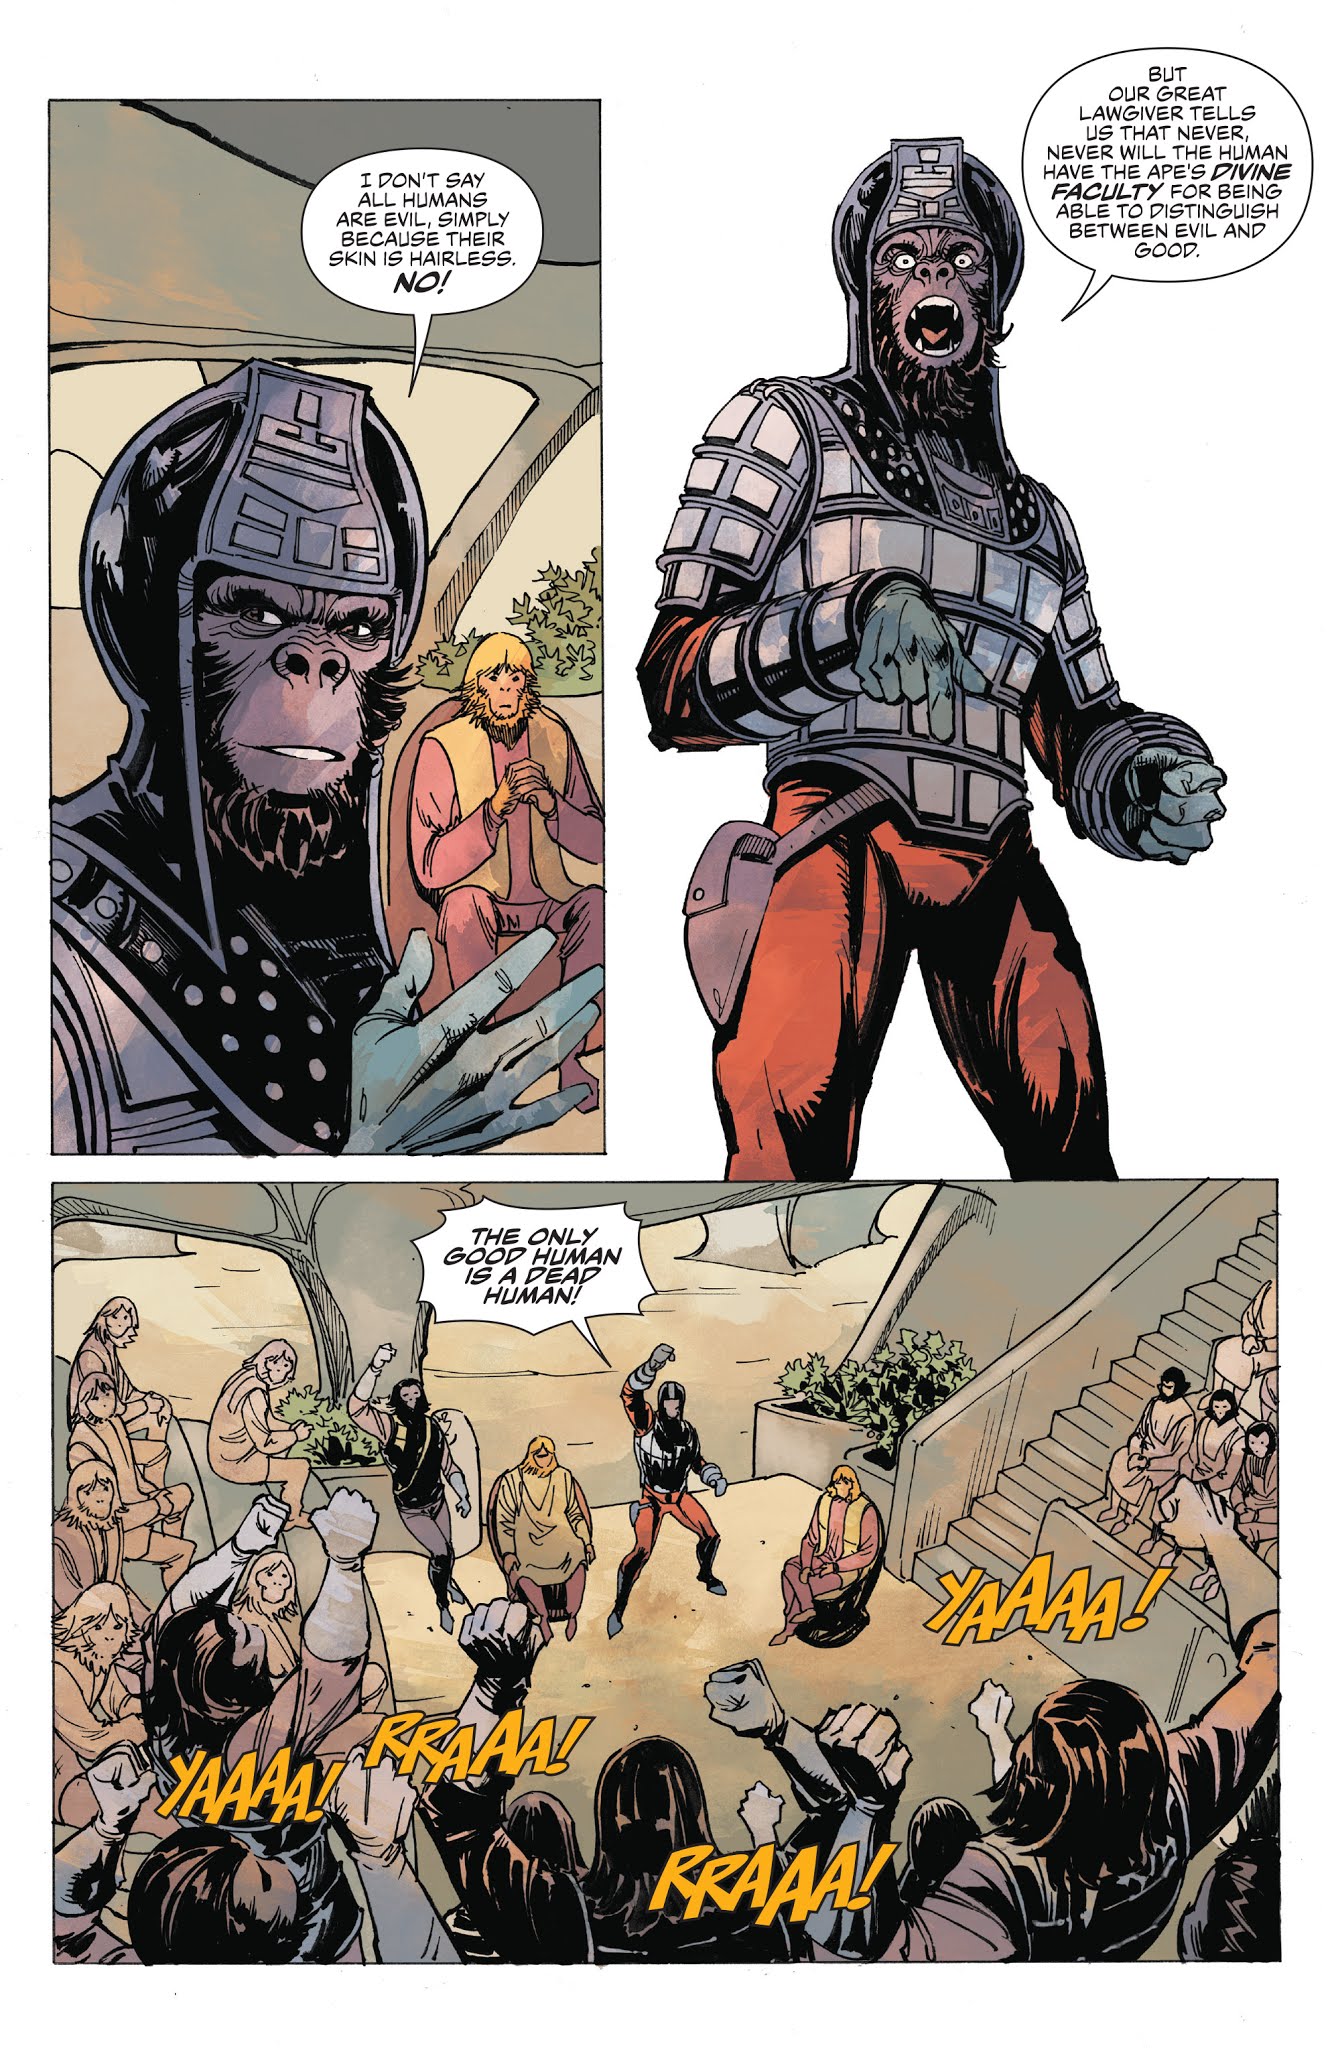 Planet Of The Apes Ursus Issue 6 | Read Planet Of The Apes Ursus Issue 6 comic online in high